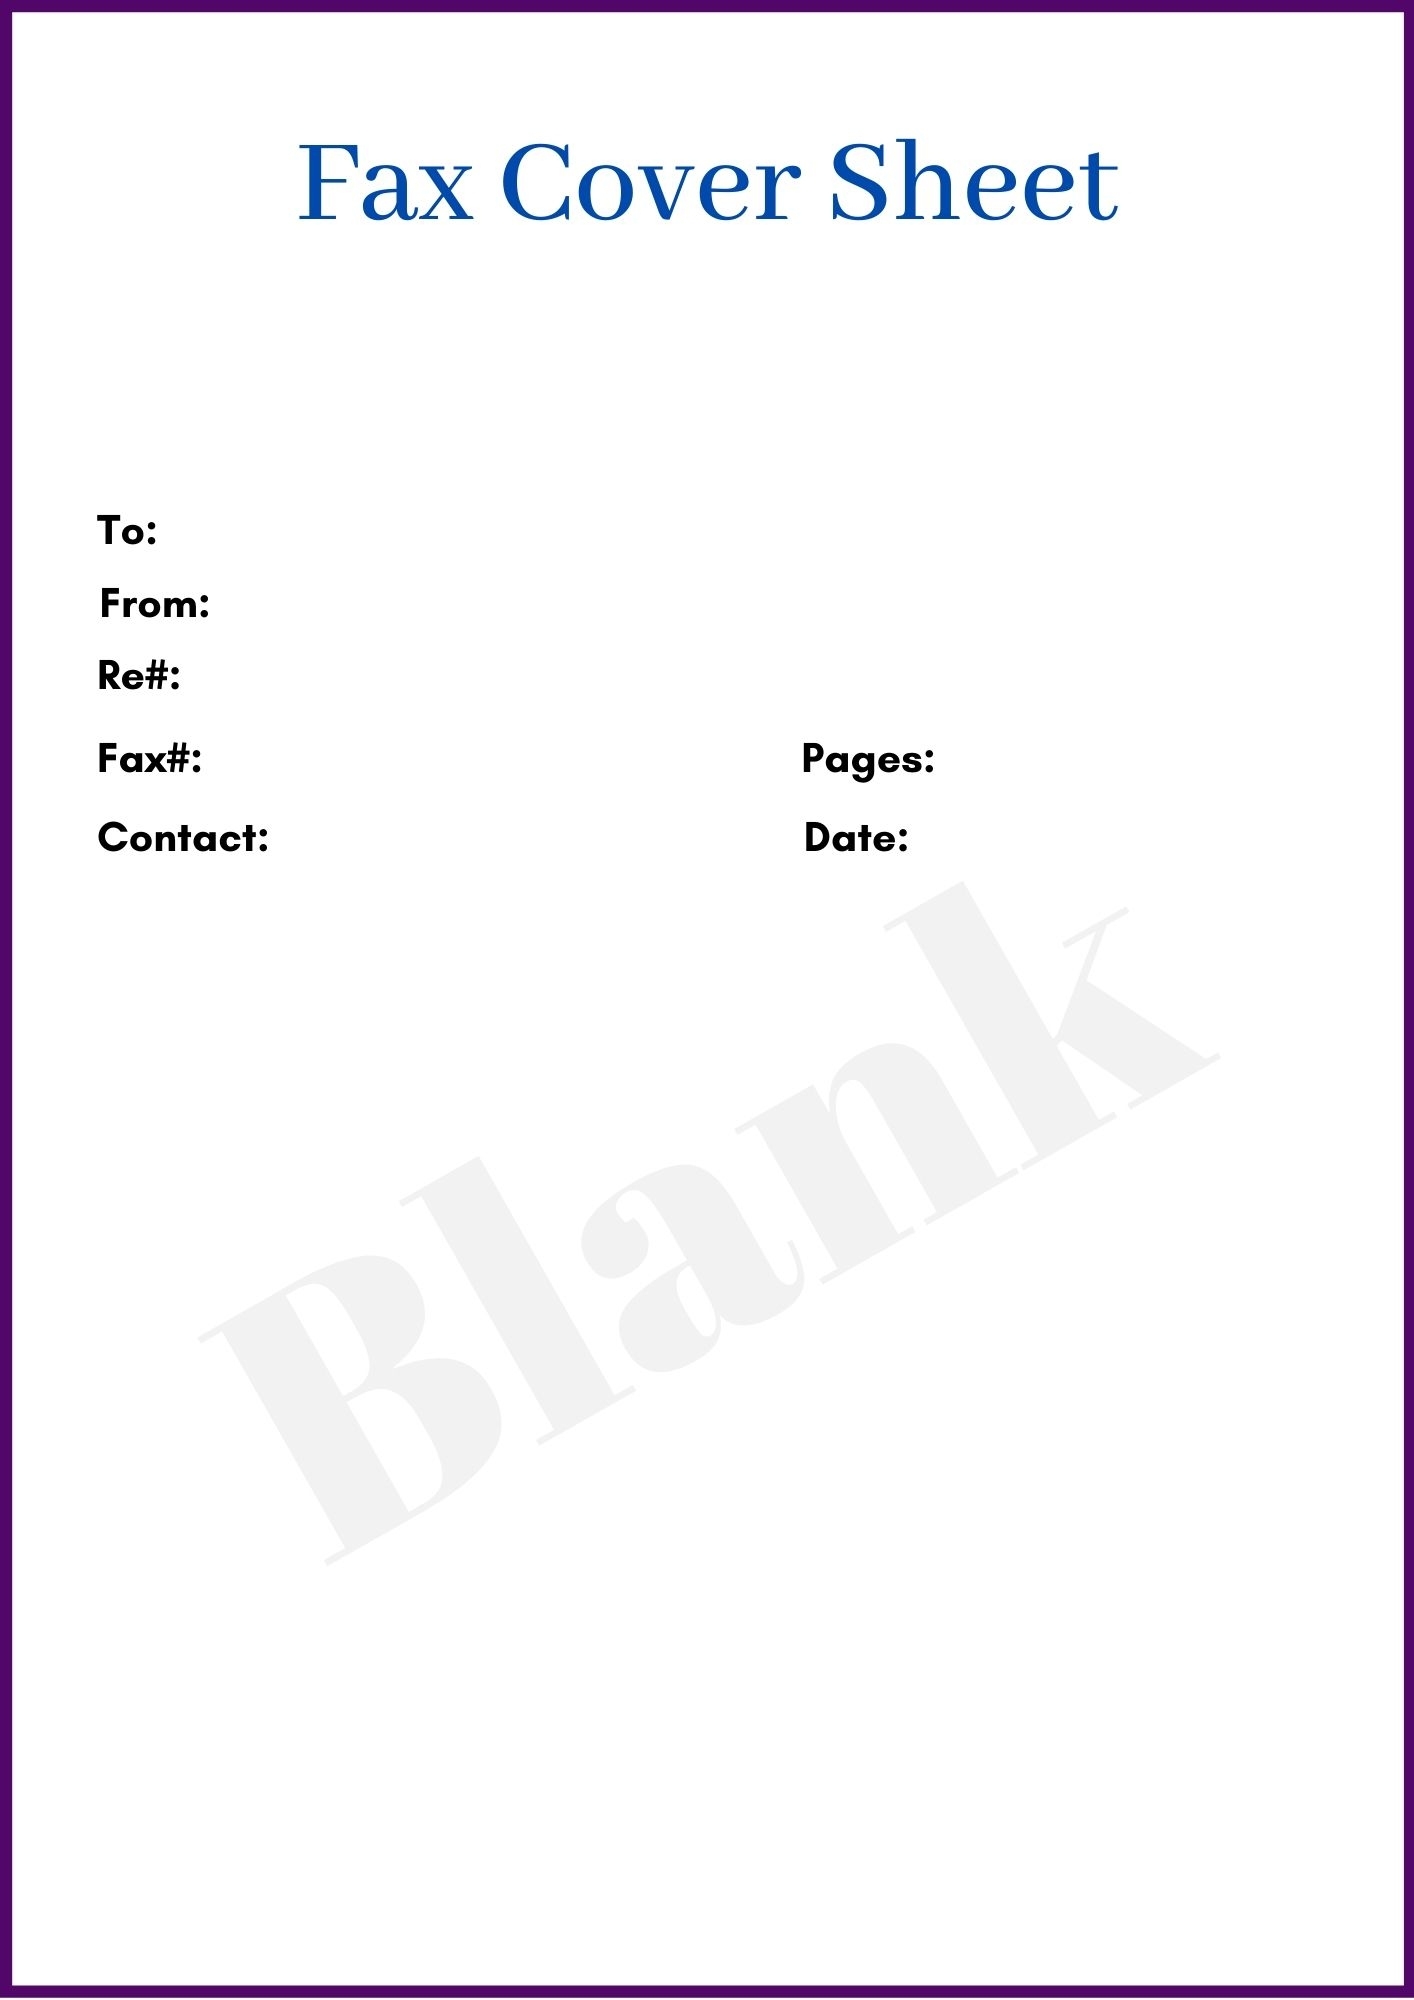 How To Create A Fax Cover Sheet In Word 2010 | Sample Letter For Fax Cover Sheet Template Word 2010